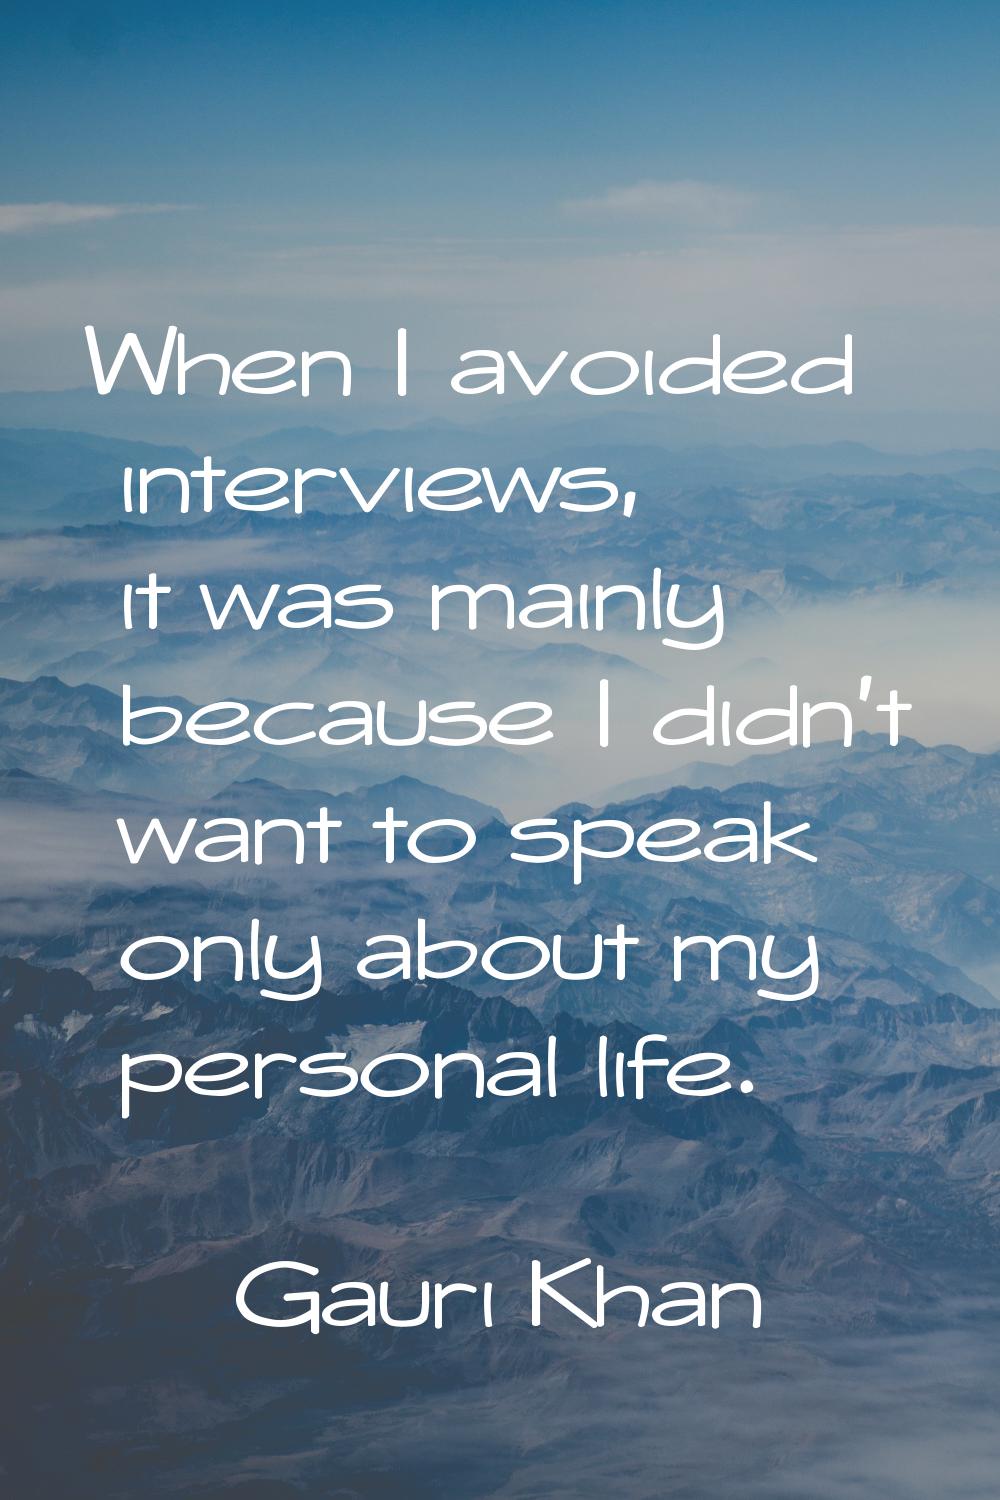 When I avoided interviews, it was mainly because I didn't want to speak only about my personal life